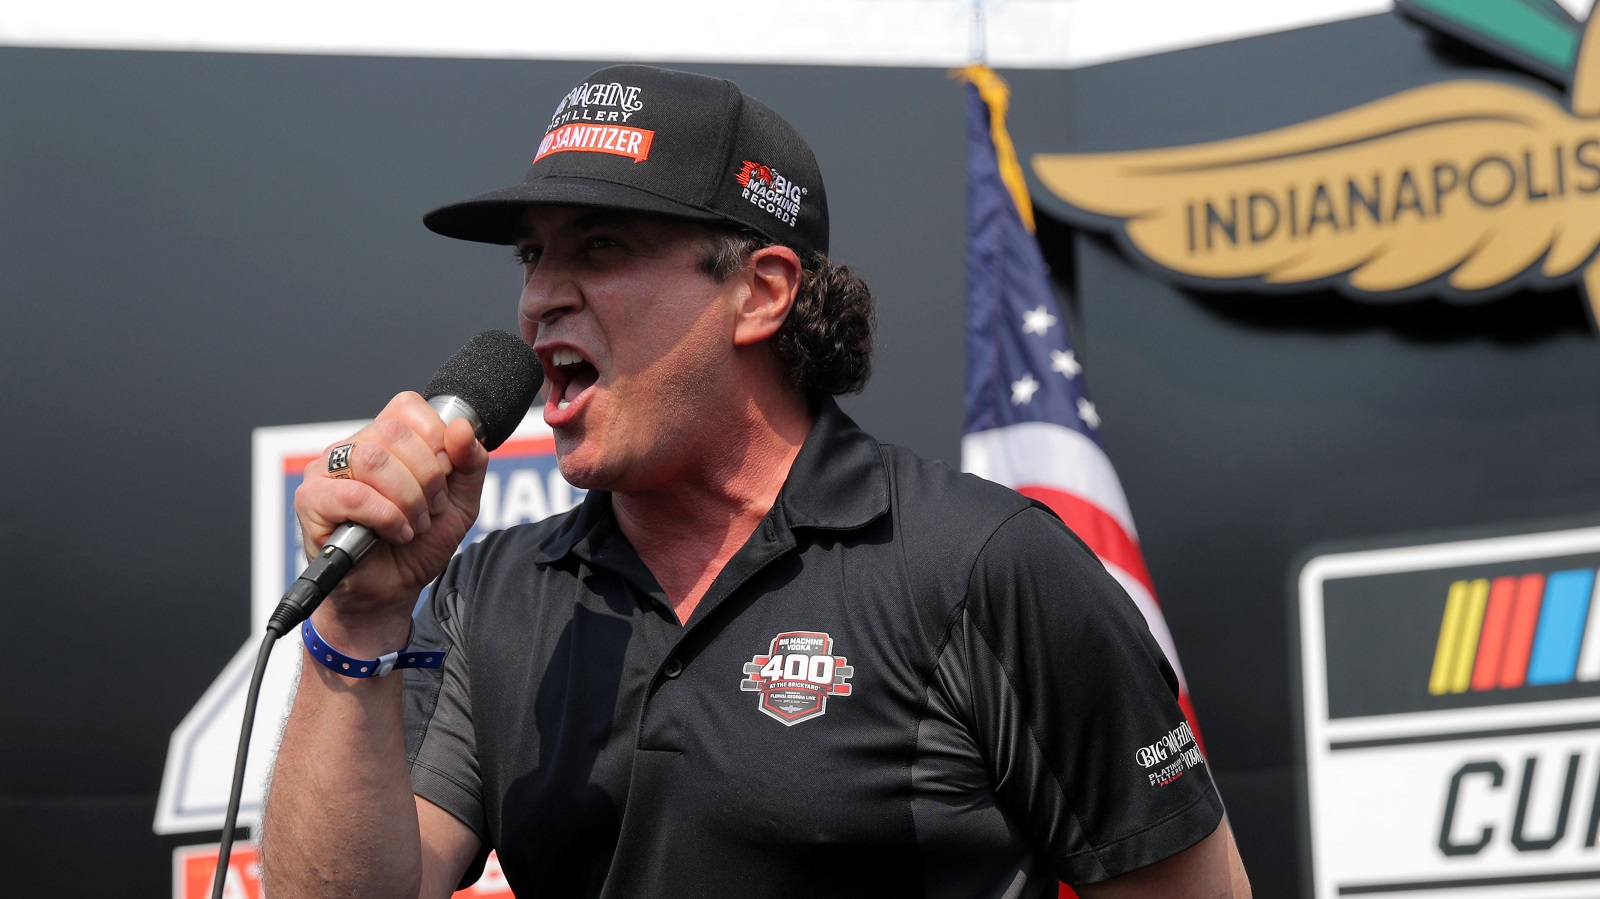 Scott Borchetta gives the command to start engines prior to the NASCAR Cup Series Big Machine Hand Sanitizer 400 at Indianapolis Motor Speedway on July 5, 2020. | Chris Graythen/Getty Images